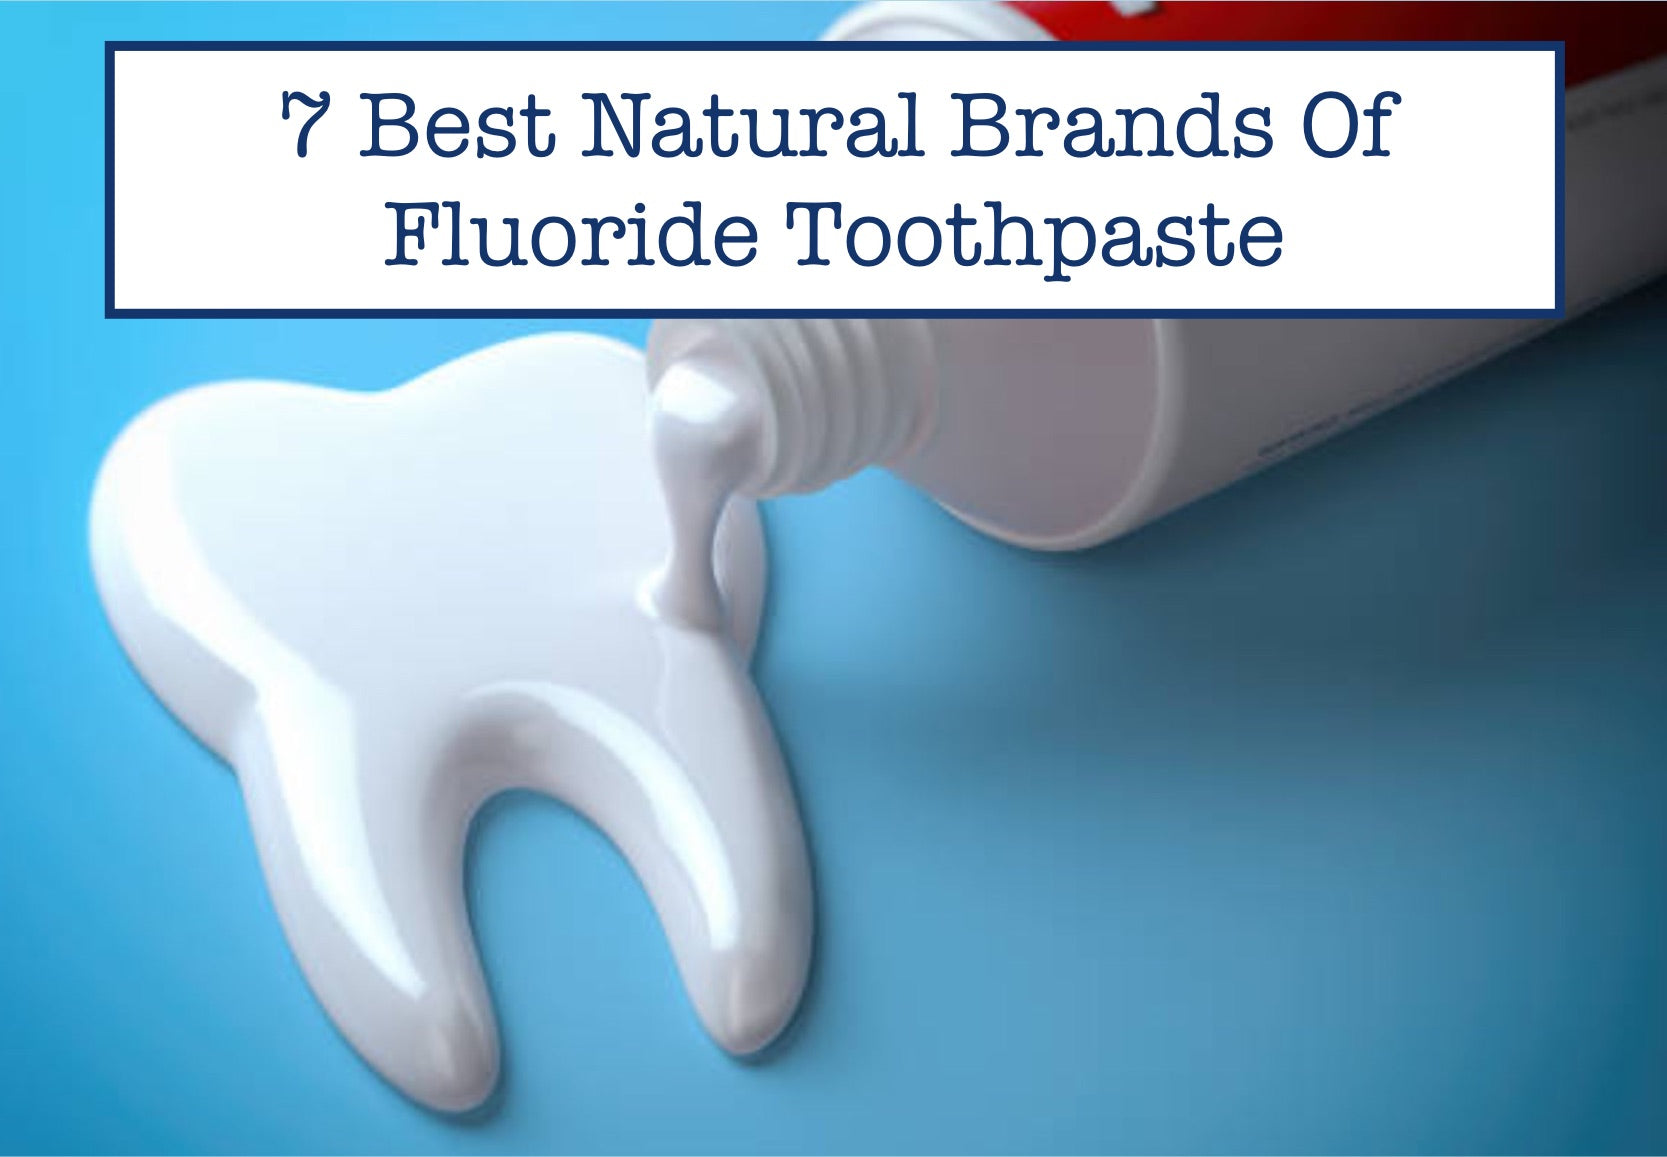 7 Best Natural Brands Of Fluoride Toothpaste